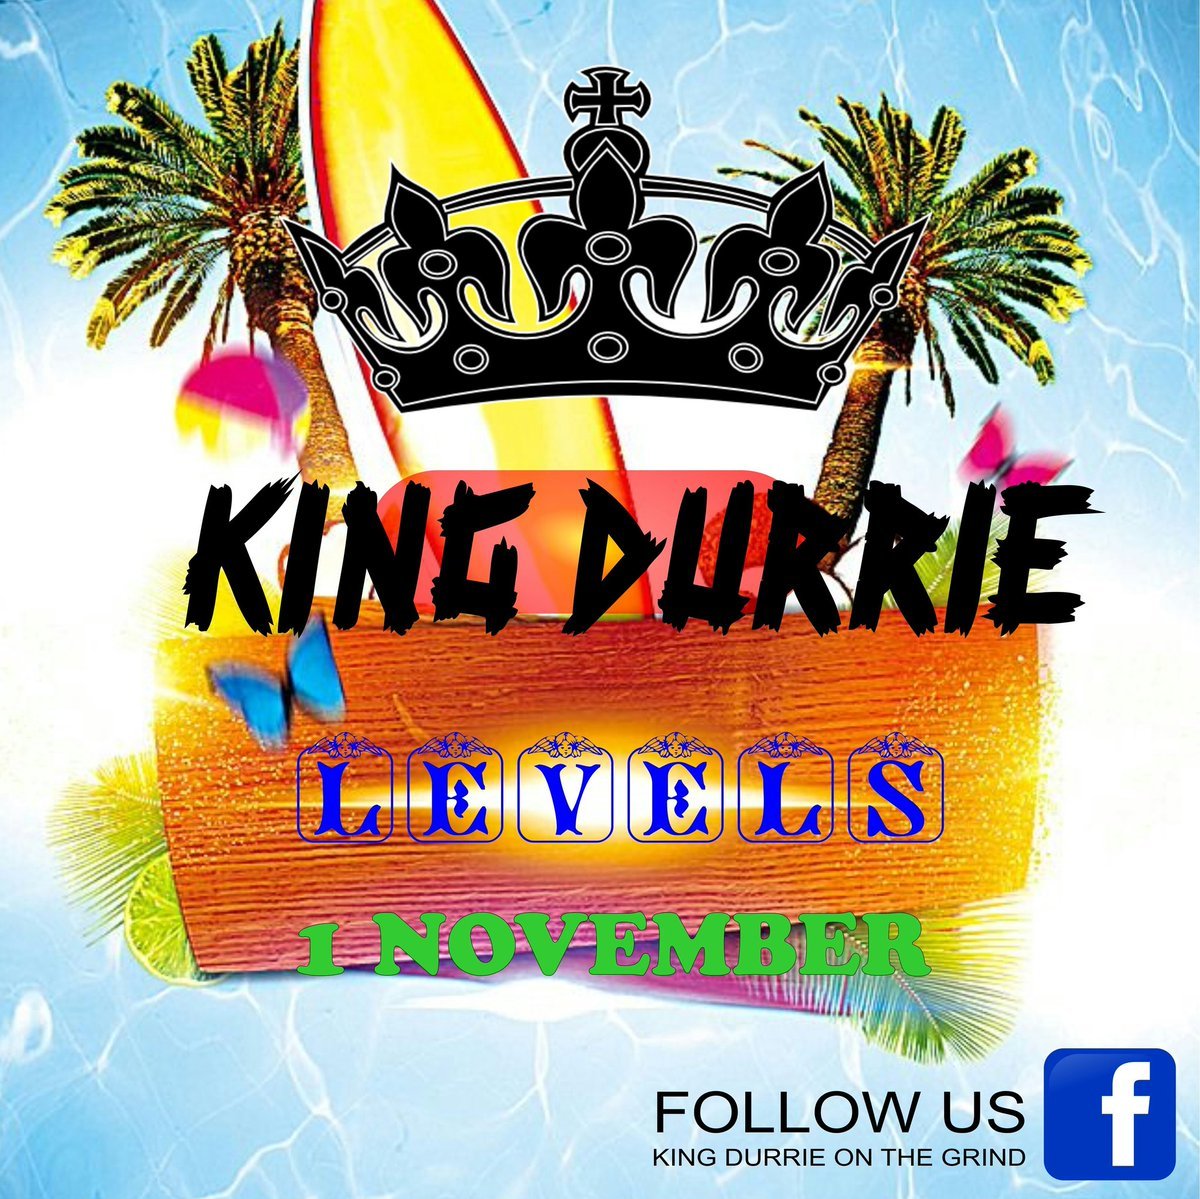 KING DURRIE IS WORKING ON A NEW SINGLE.